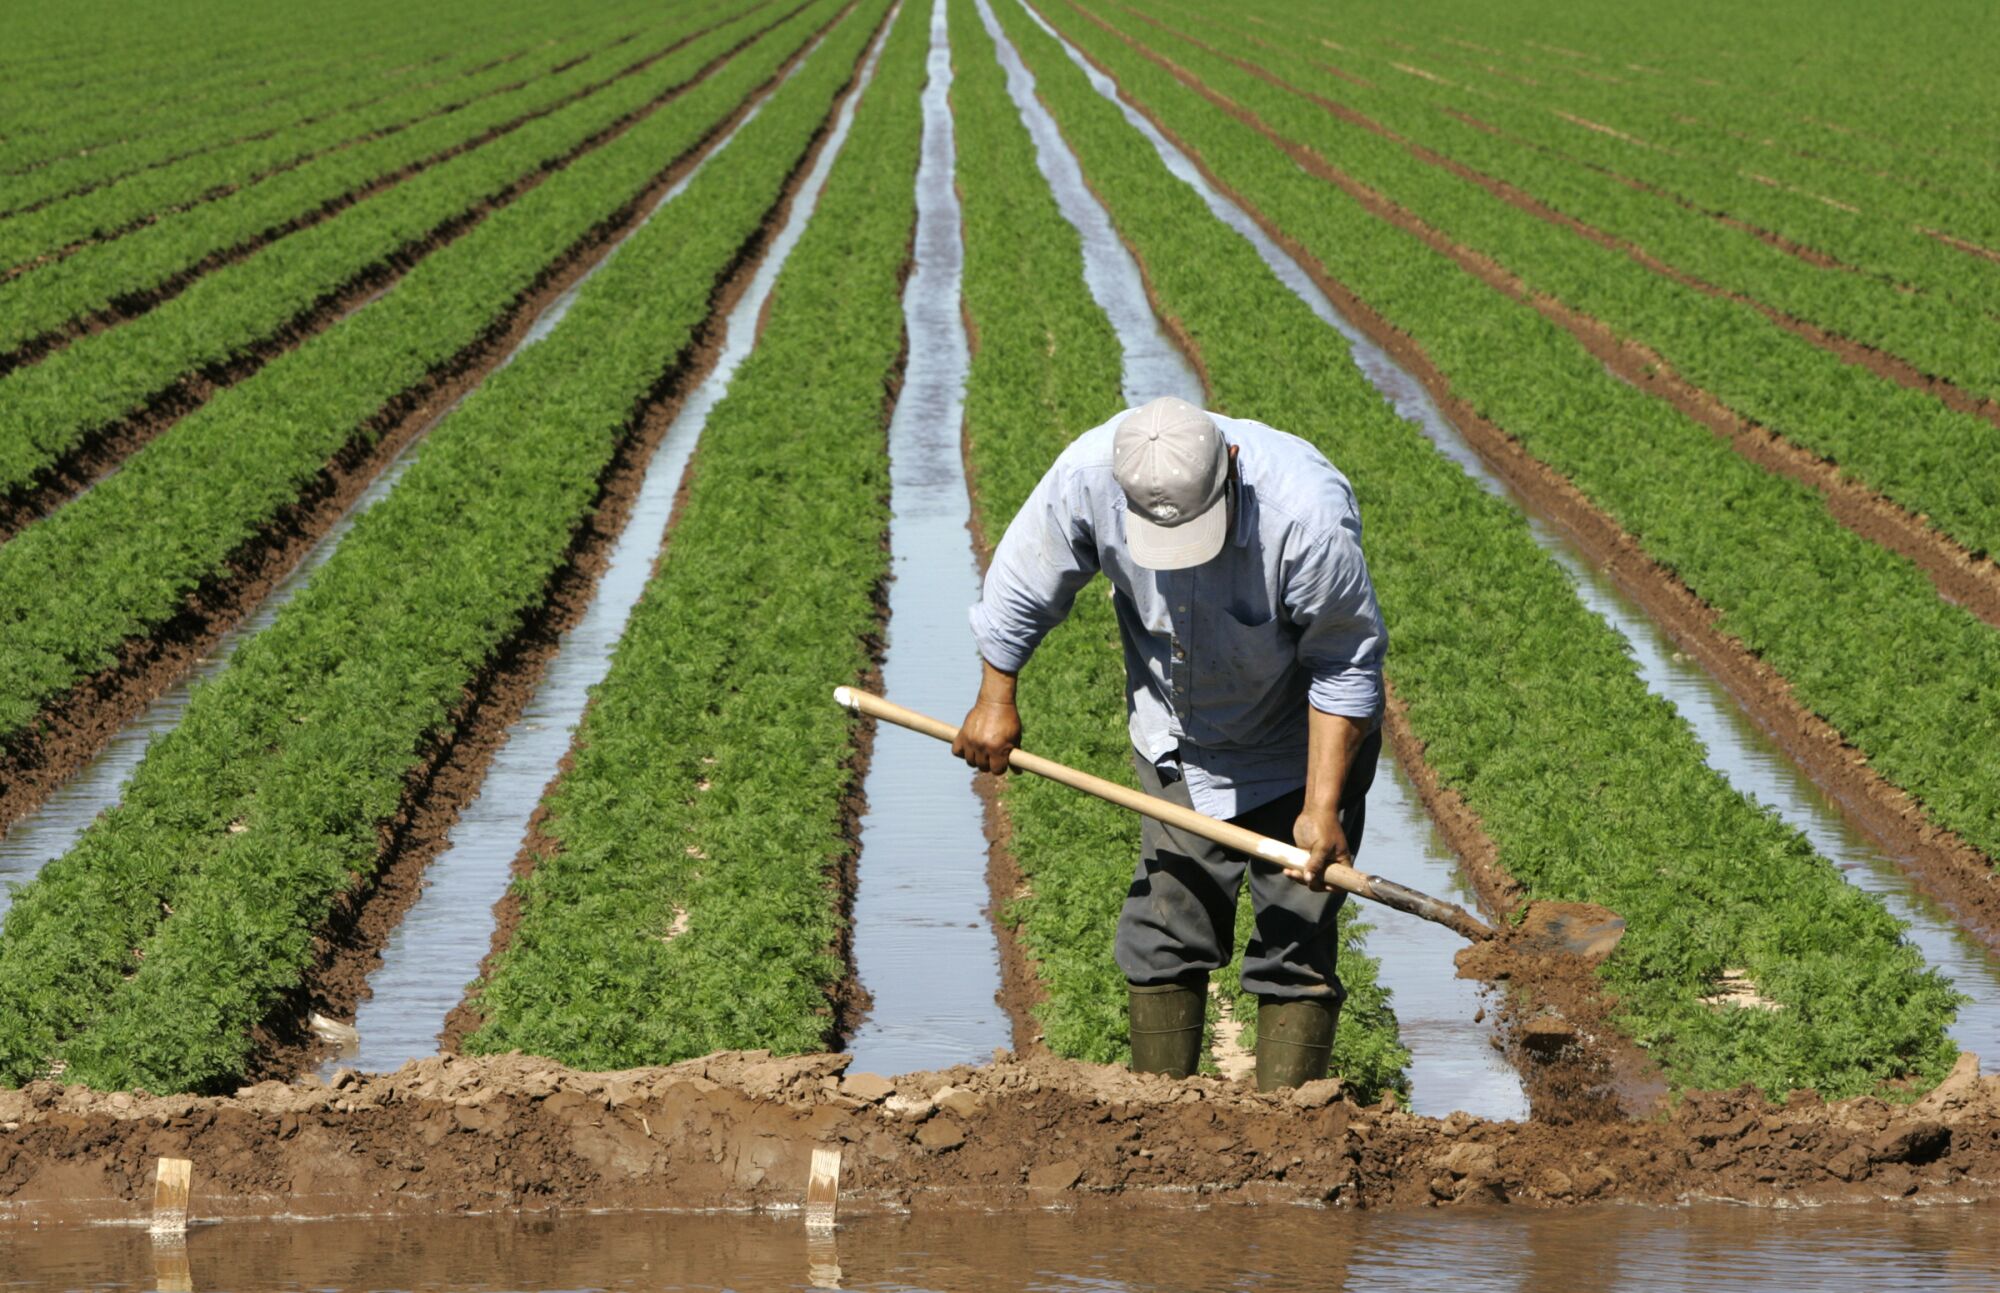 Jorge Ponce, an irrigator, adjusts the flow of ditch water into a carrot field in the Imperial Valley.